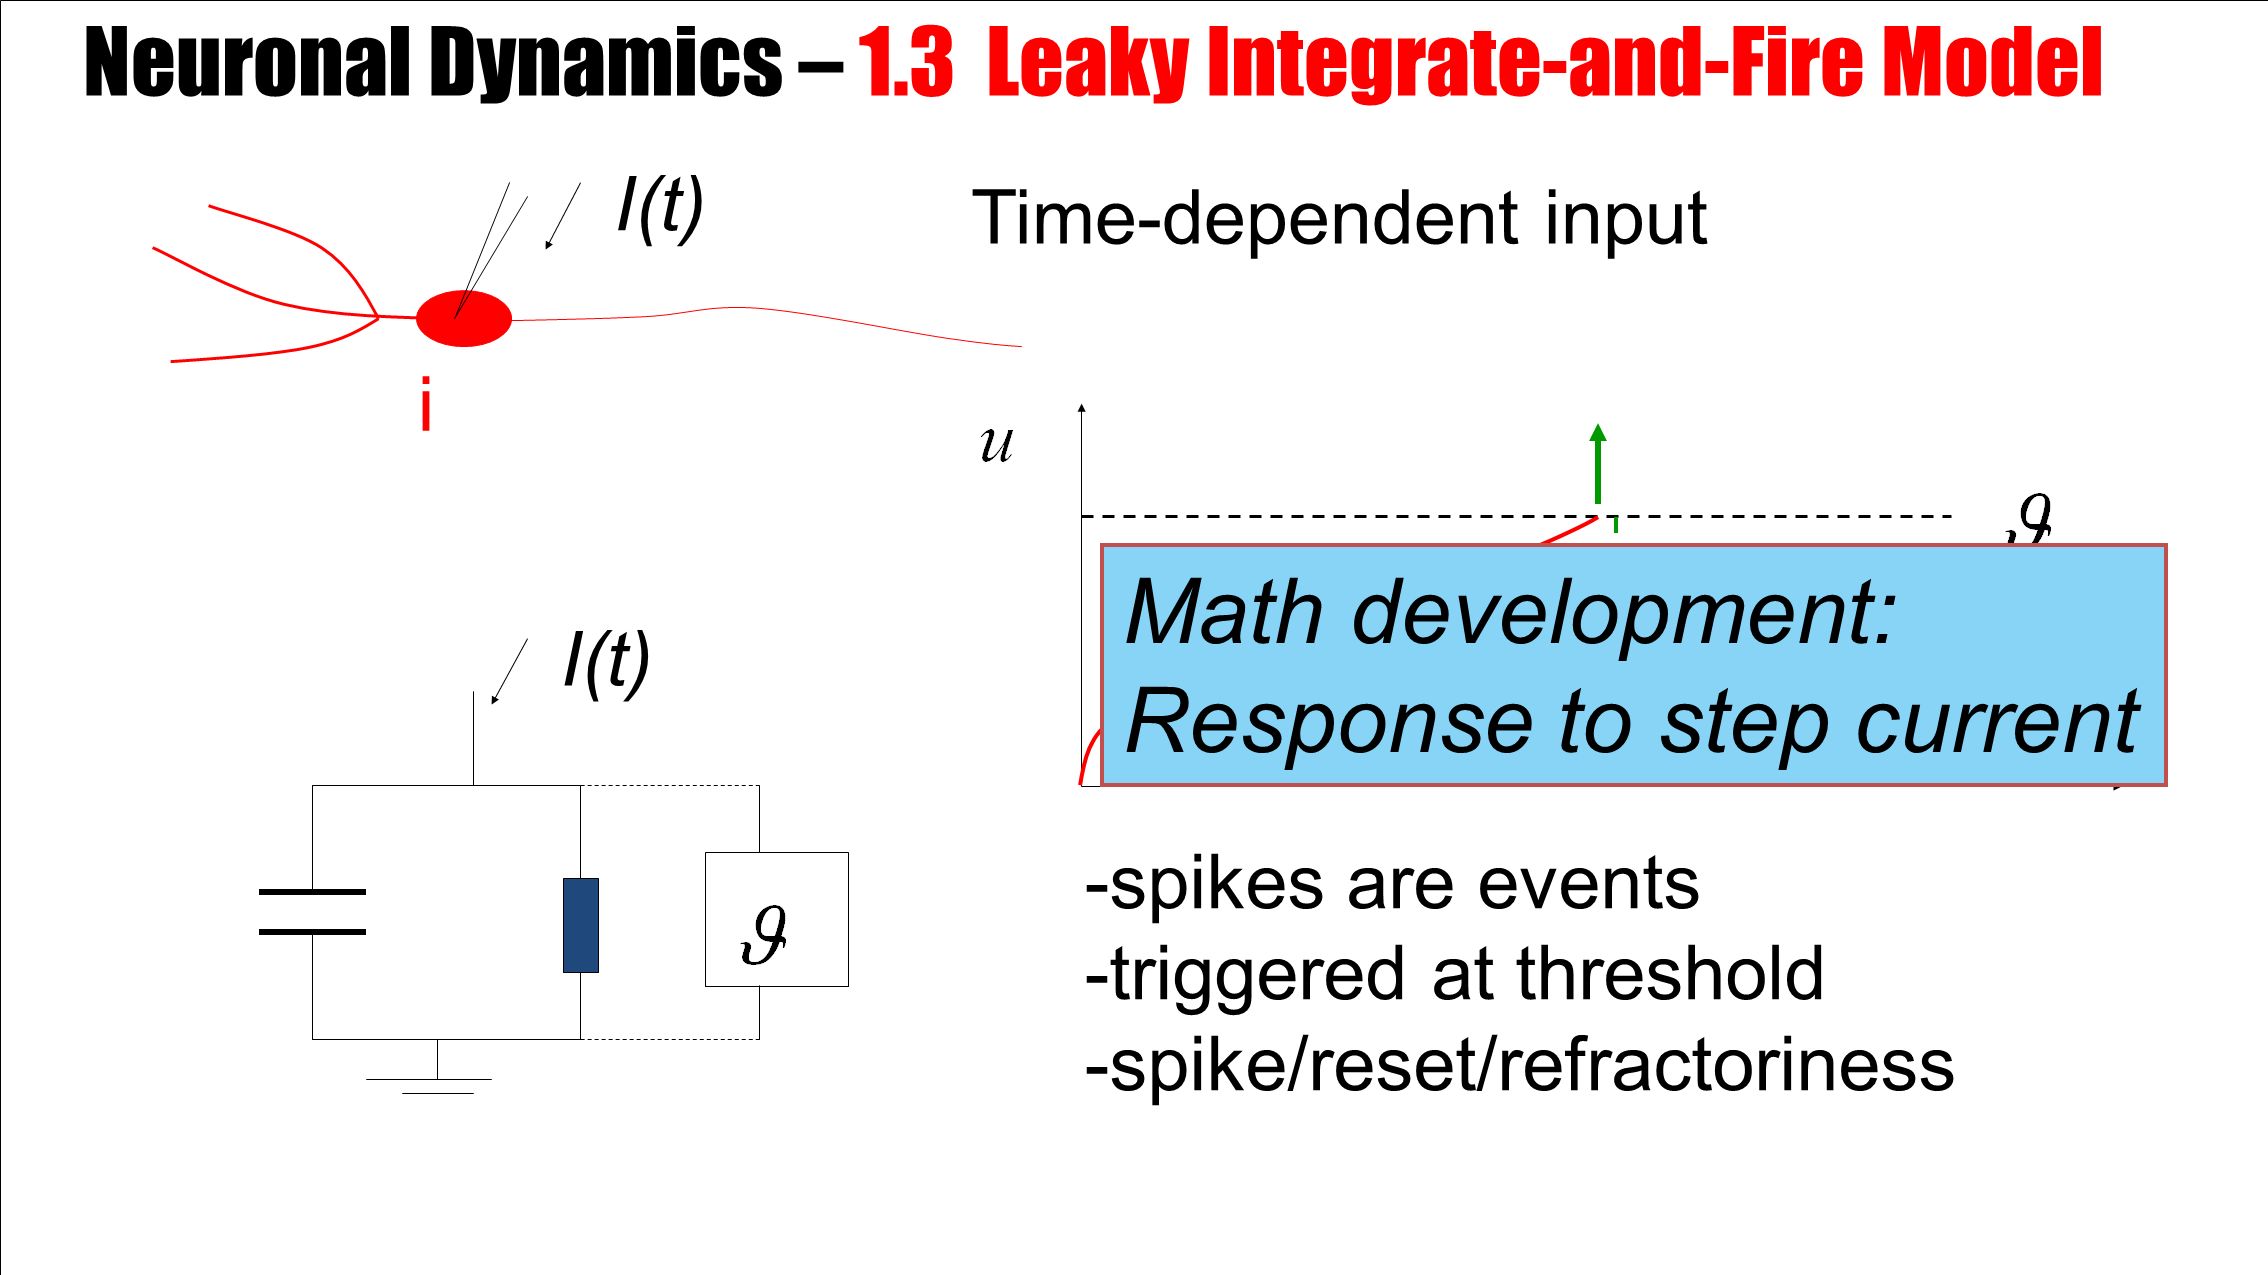 i -spikes are events -triggered at threshold -spike/reset/refractoriness I(t) Time-dependent input Math development: Response to step current Neuronal Dynamics – 1.3 Leaky Integrate-and-Fire Model